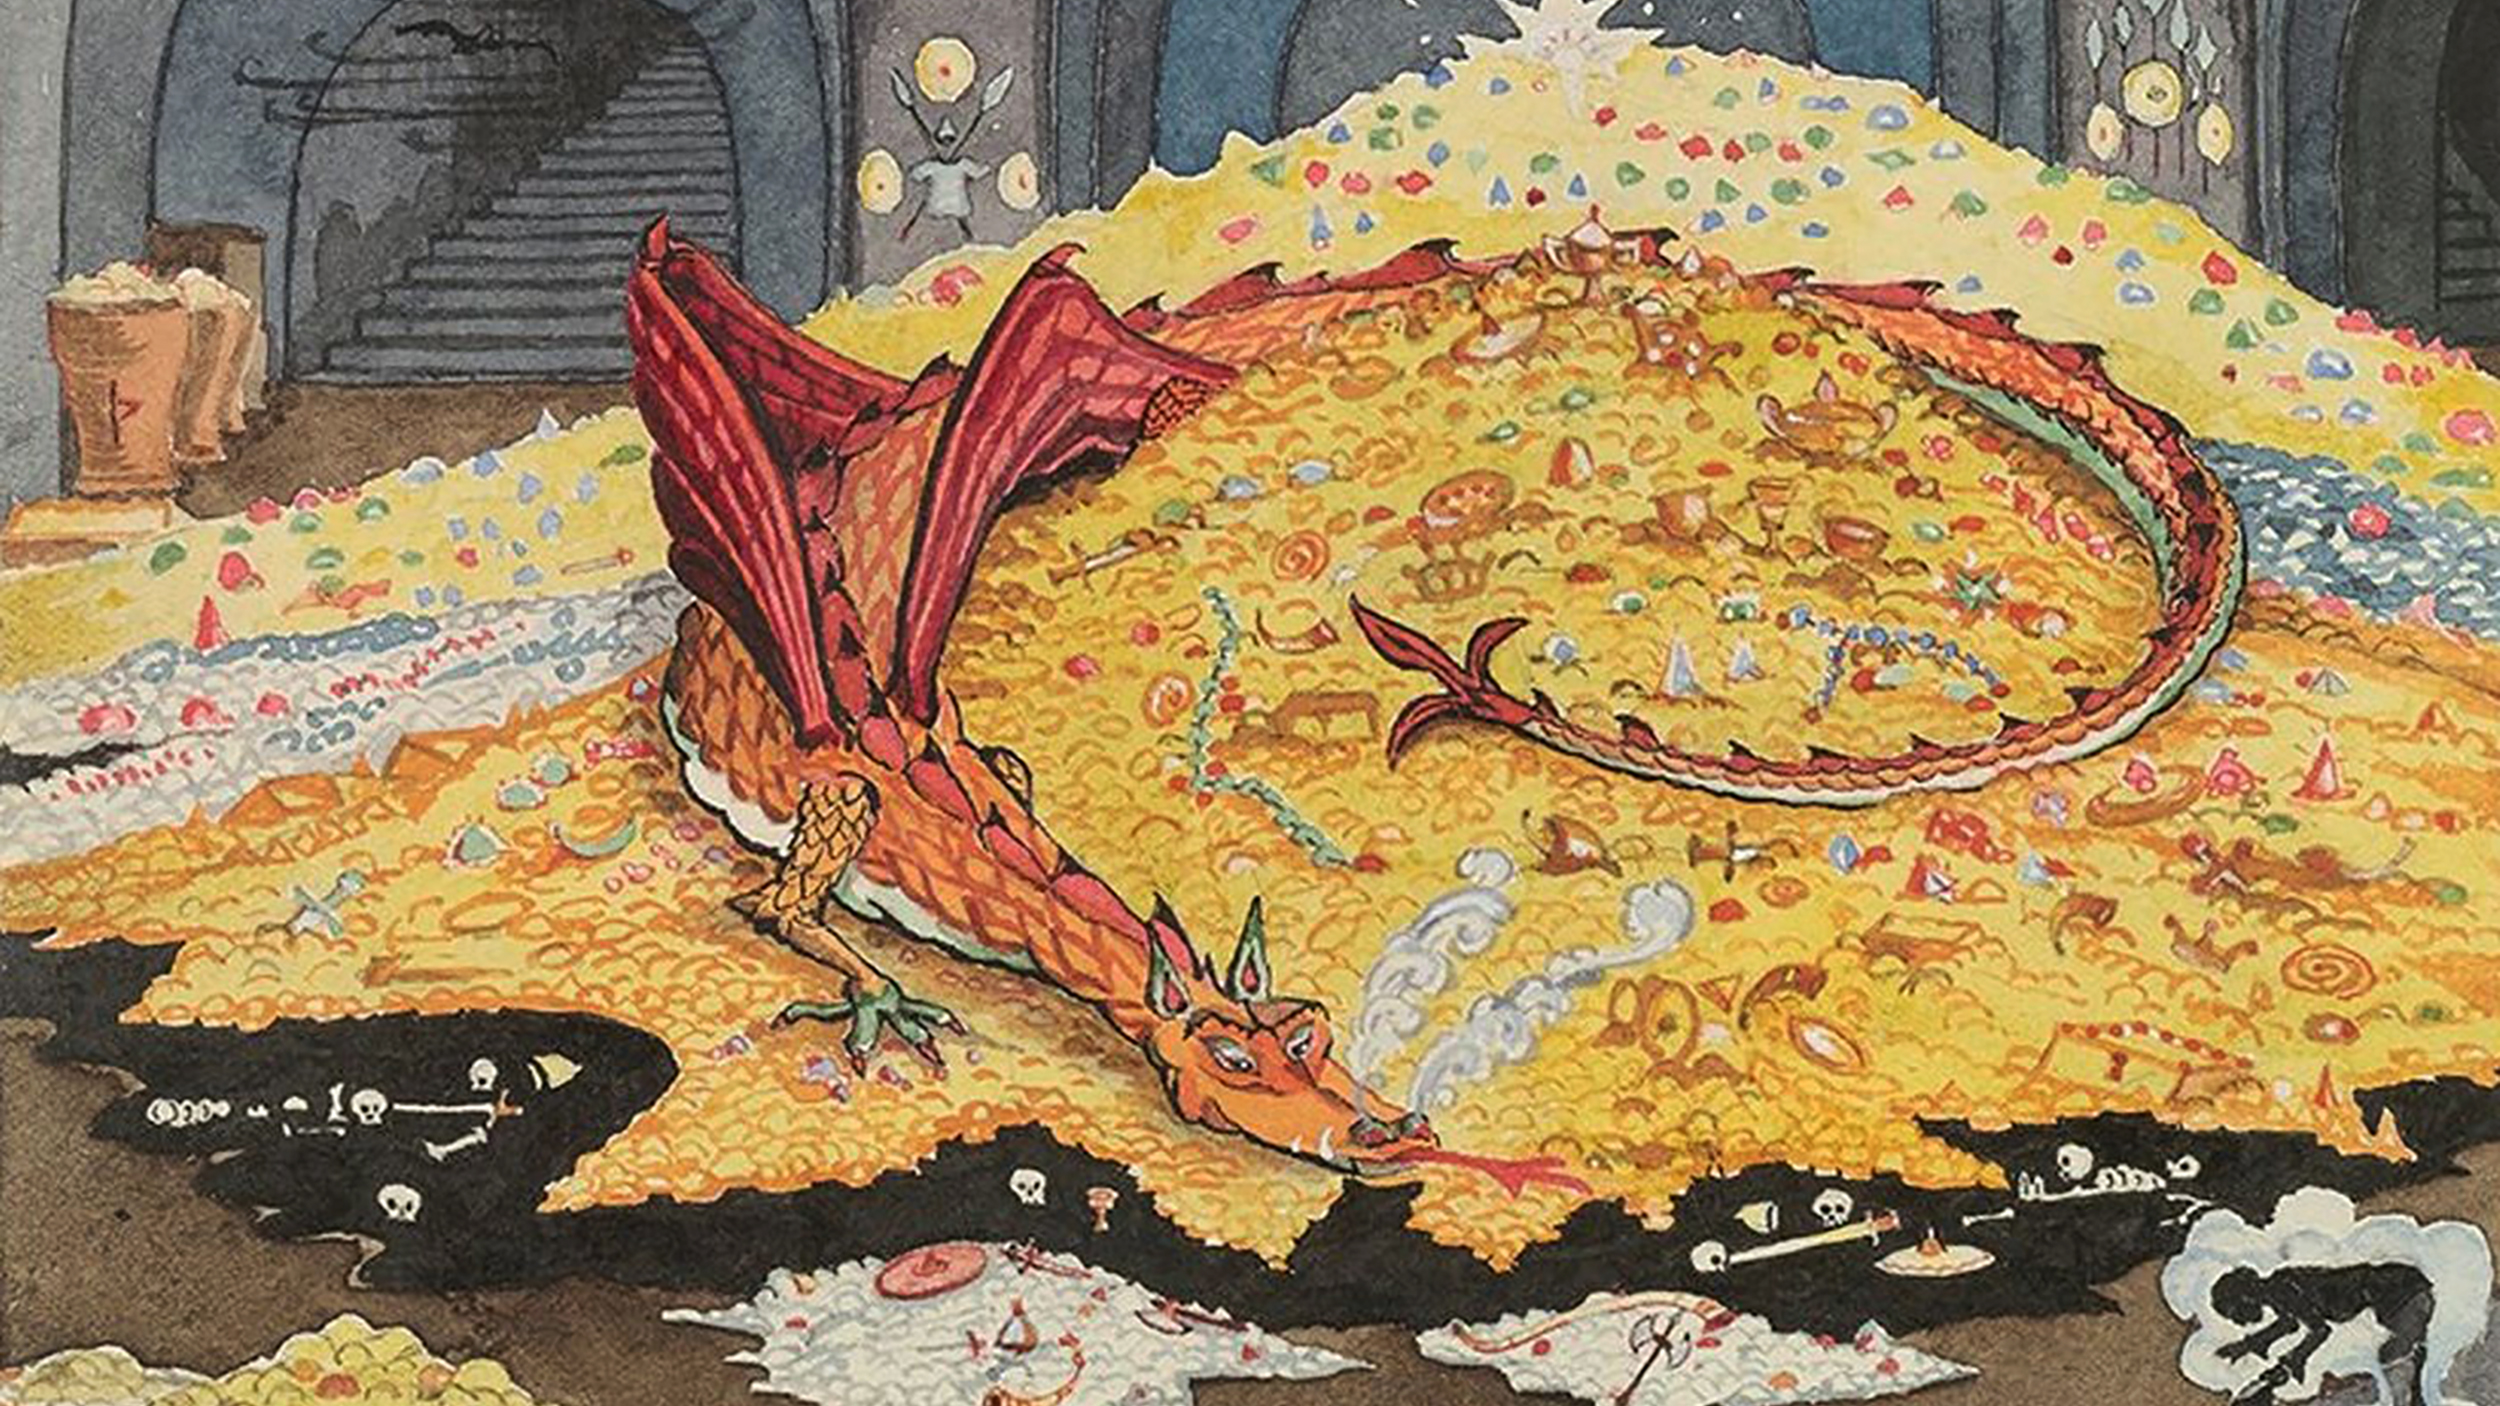 A drawing of a dragon on a pile of gold, symbolizing hope.